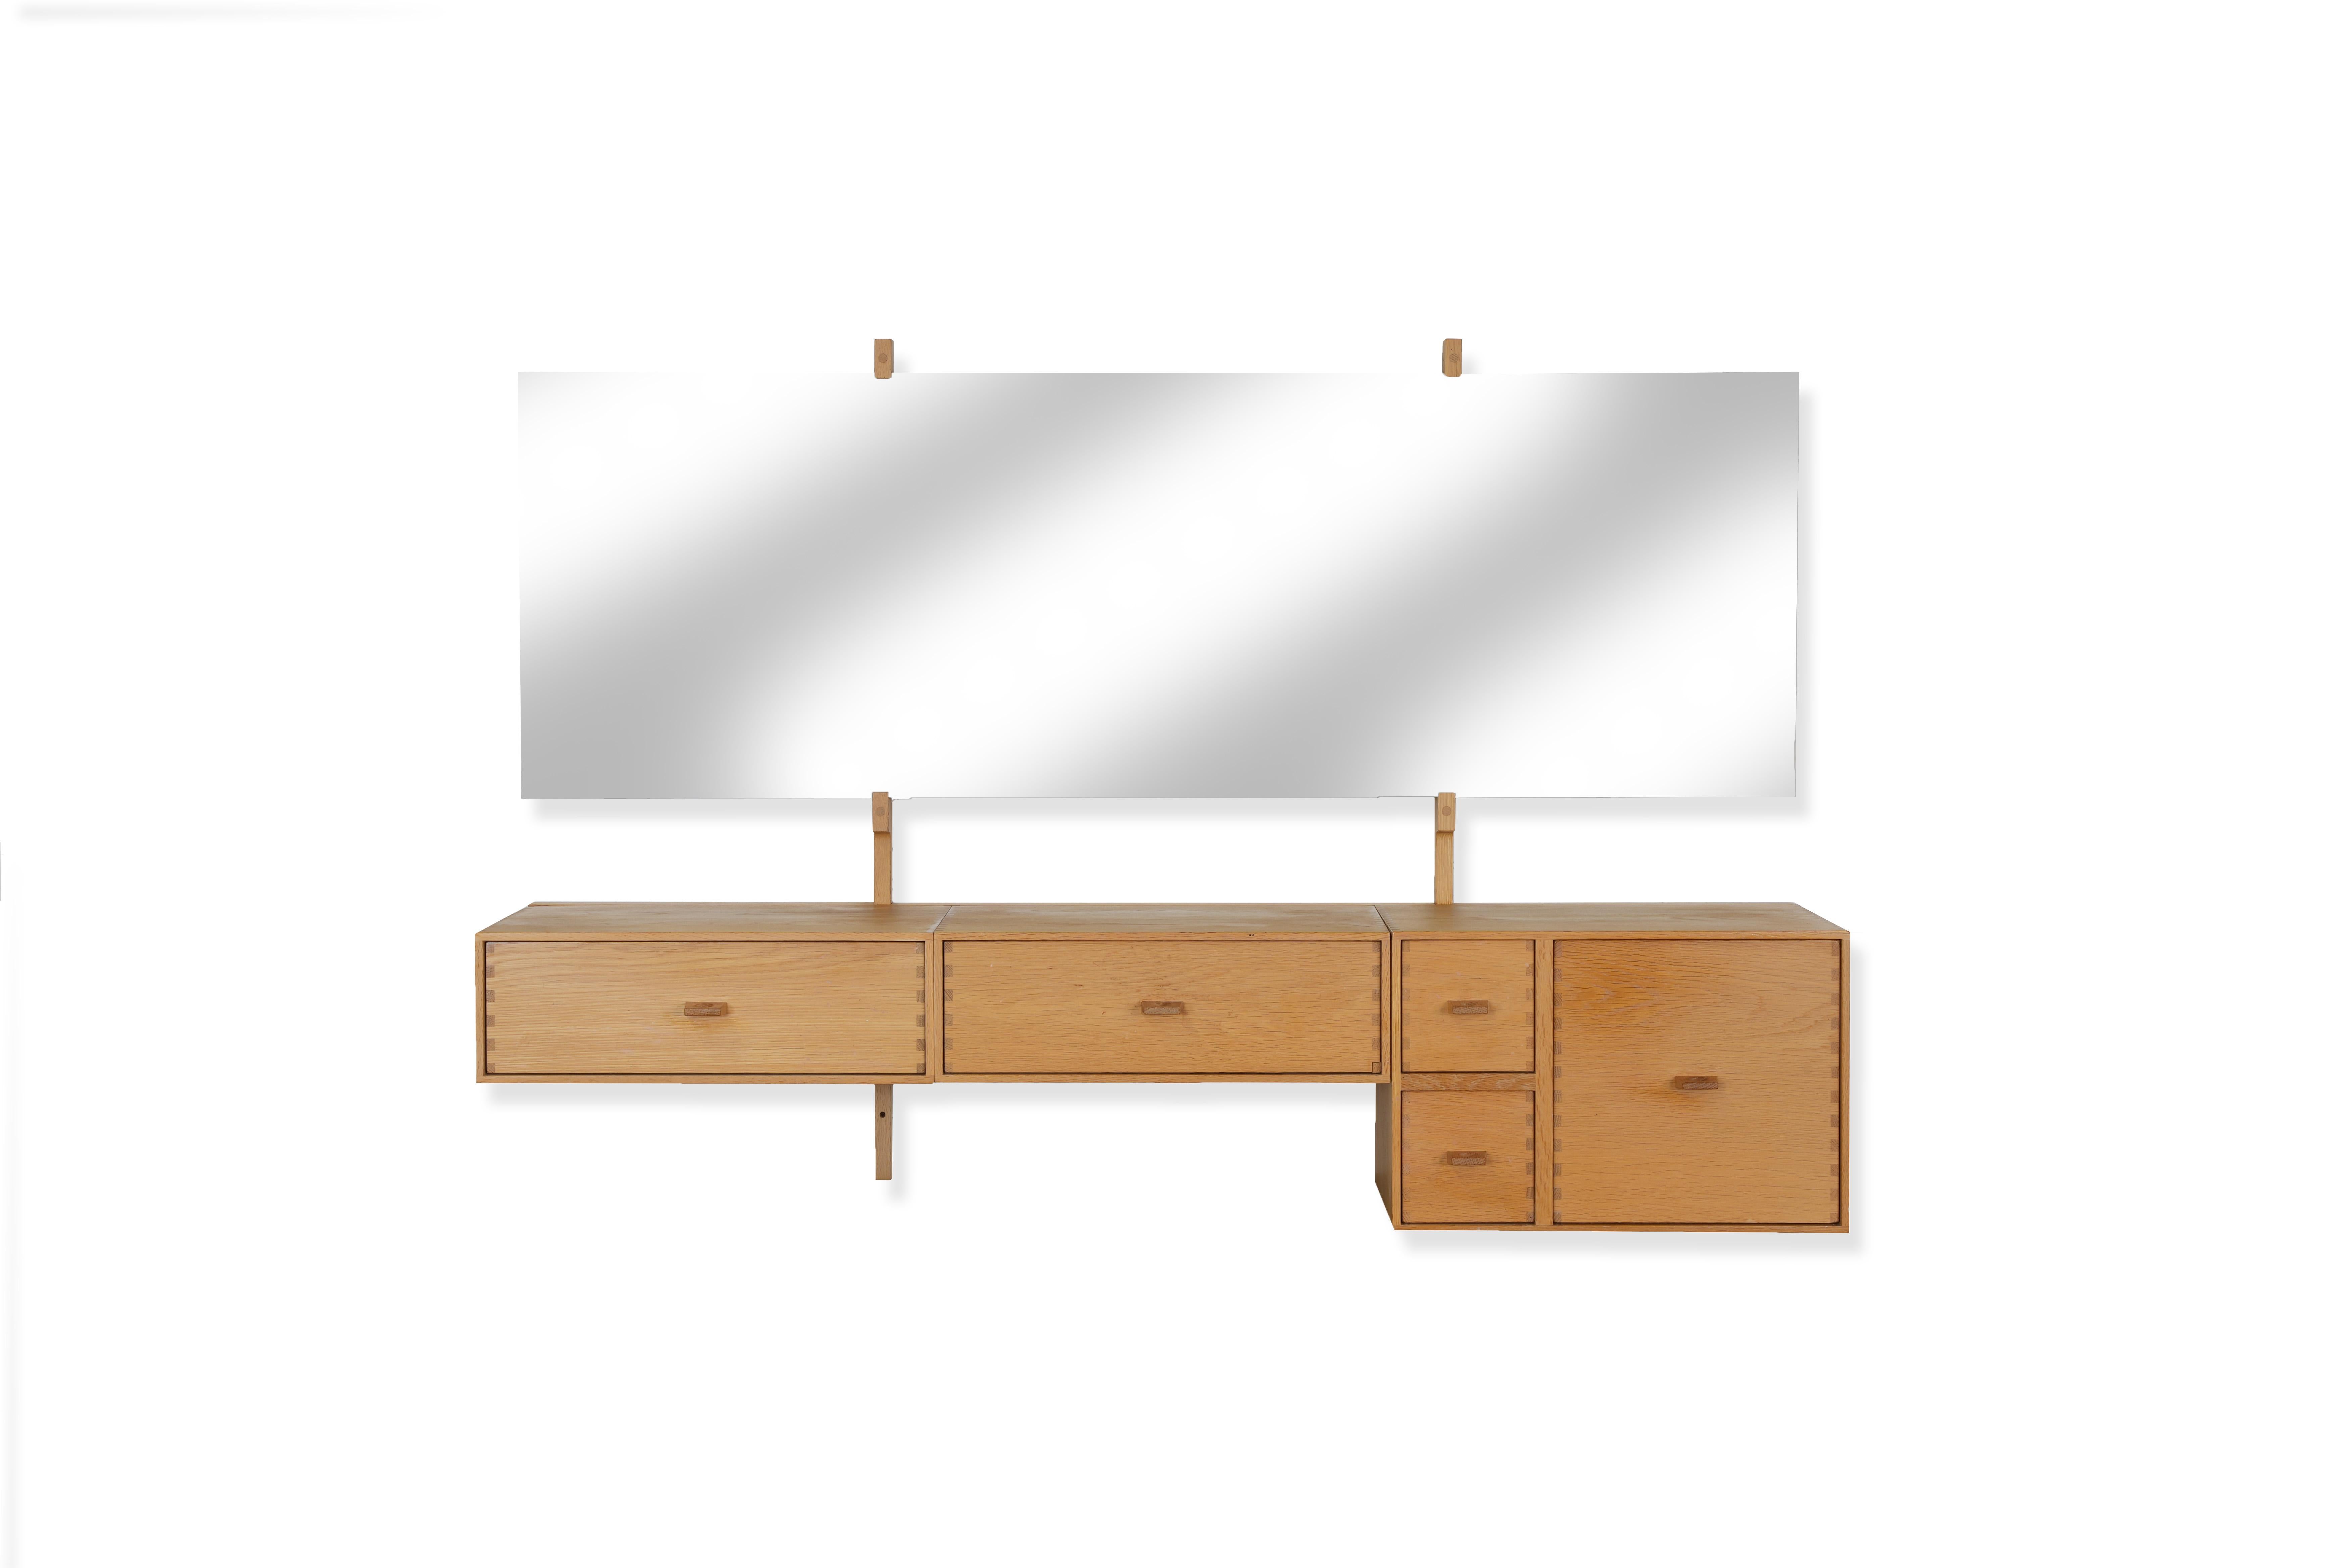 Beautiful wall dressing table by Uno and Östen Kristiansson, made from oak. Cool details in the joinery and the sculpted handles on the drawers.
In great original condition and ready for usage.